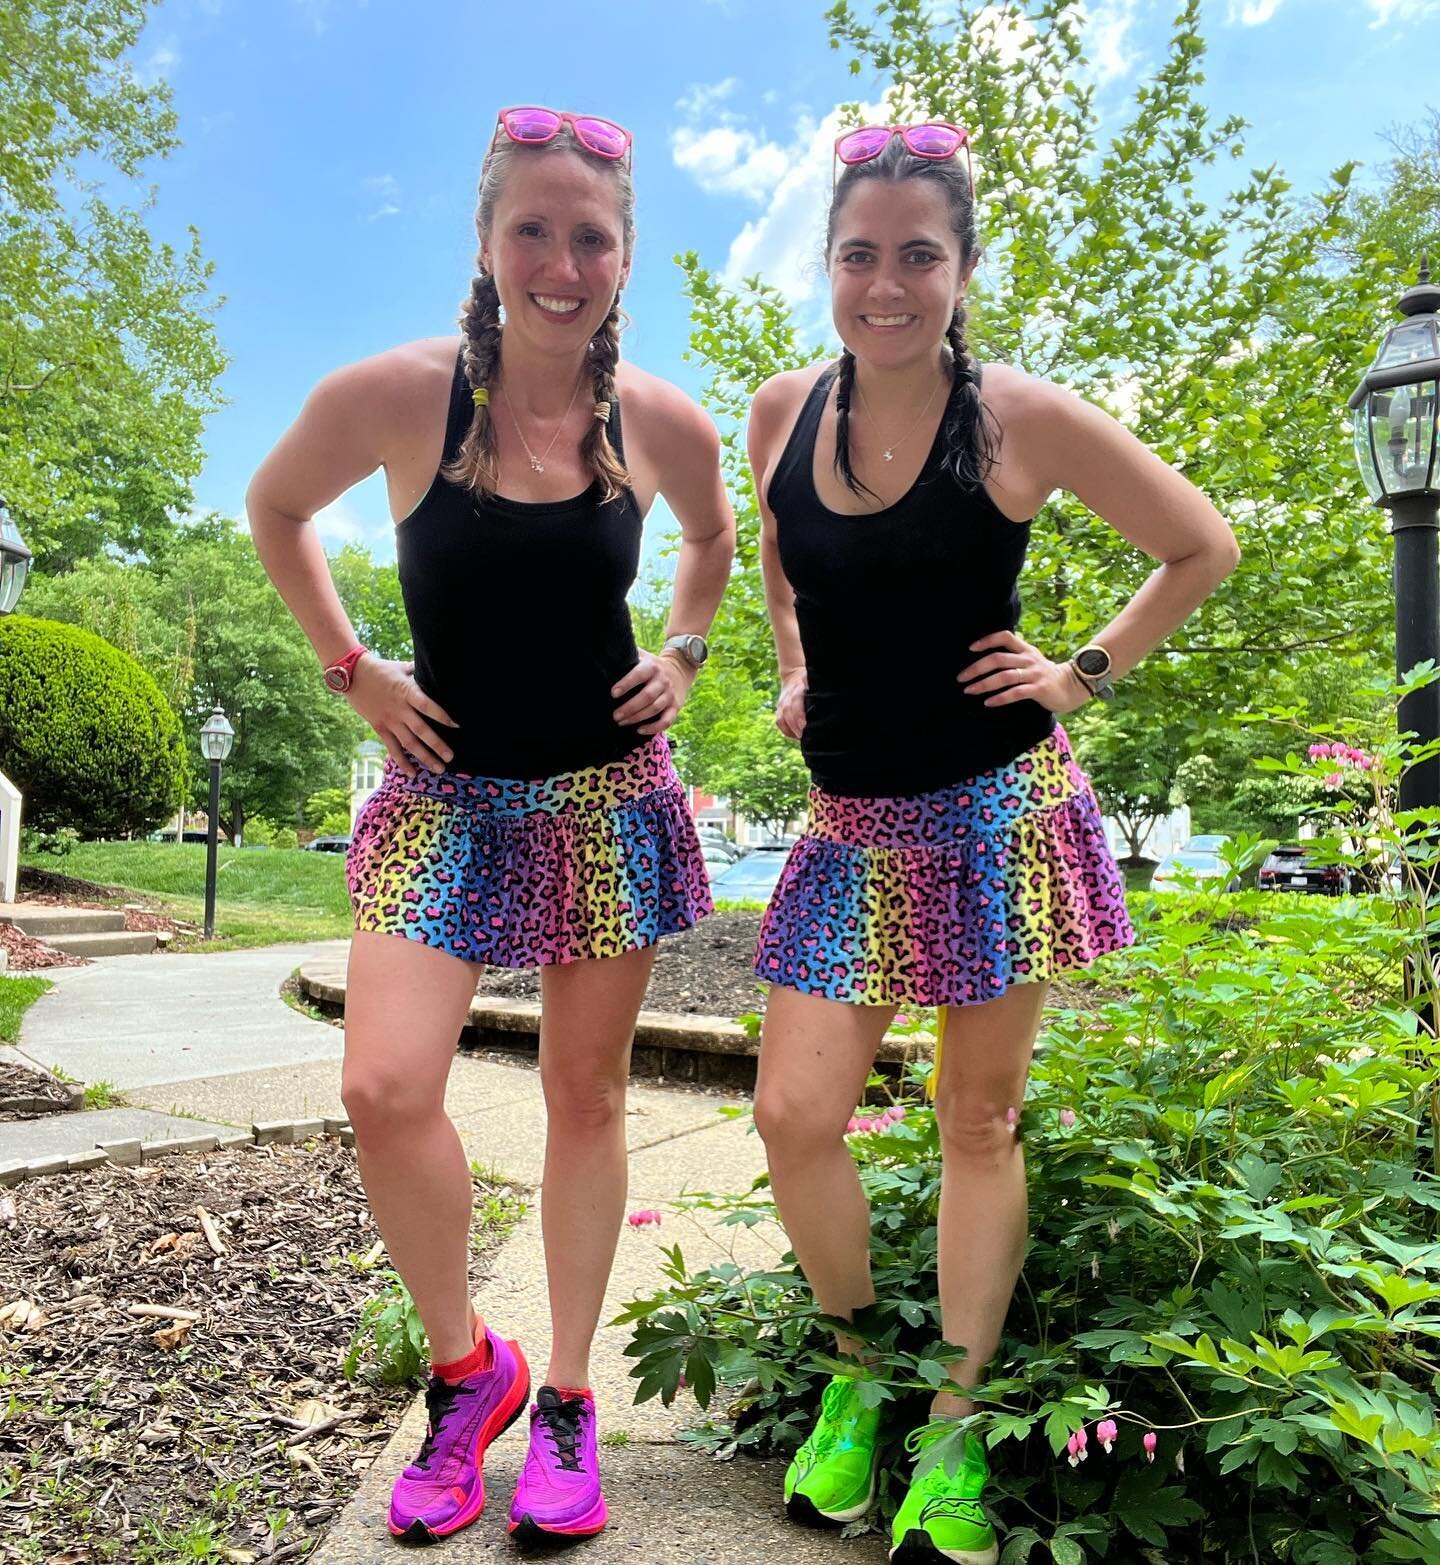 Midday &ldquo;heat acclimation training&rdquo; and birthday miles for me (@coachlizruns).

We ran for an hour and a half, then walked for 20 minutes. We started with a workout that burned the engines too hot, so we made the decision to back off and c